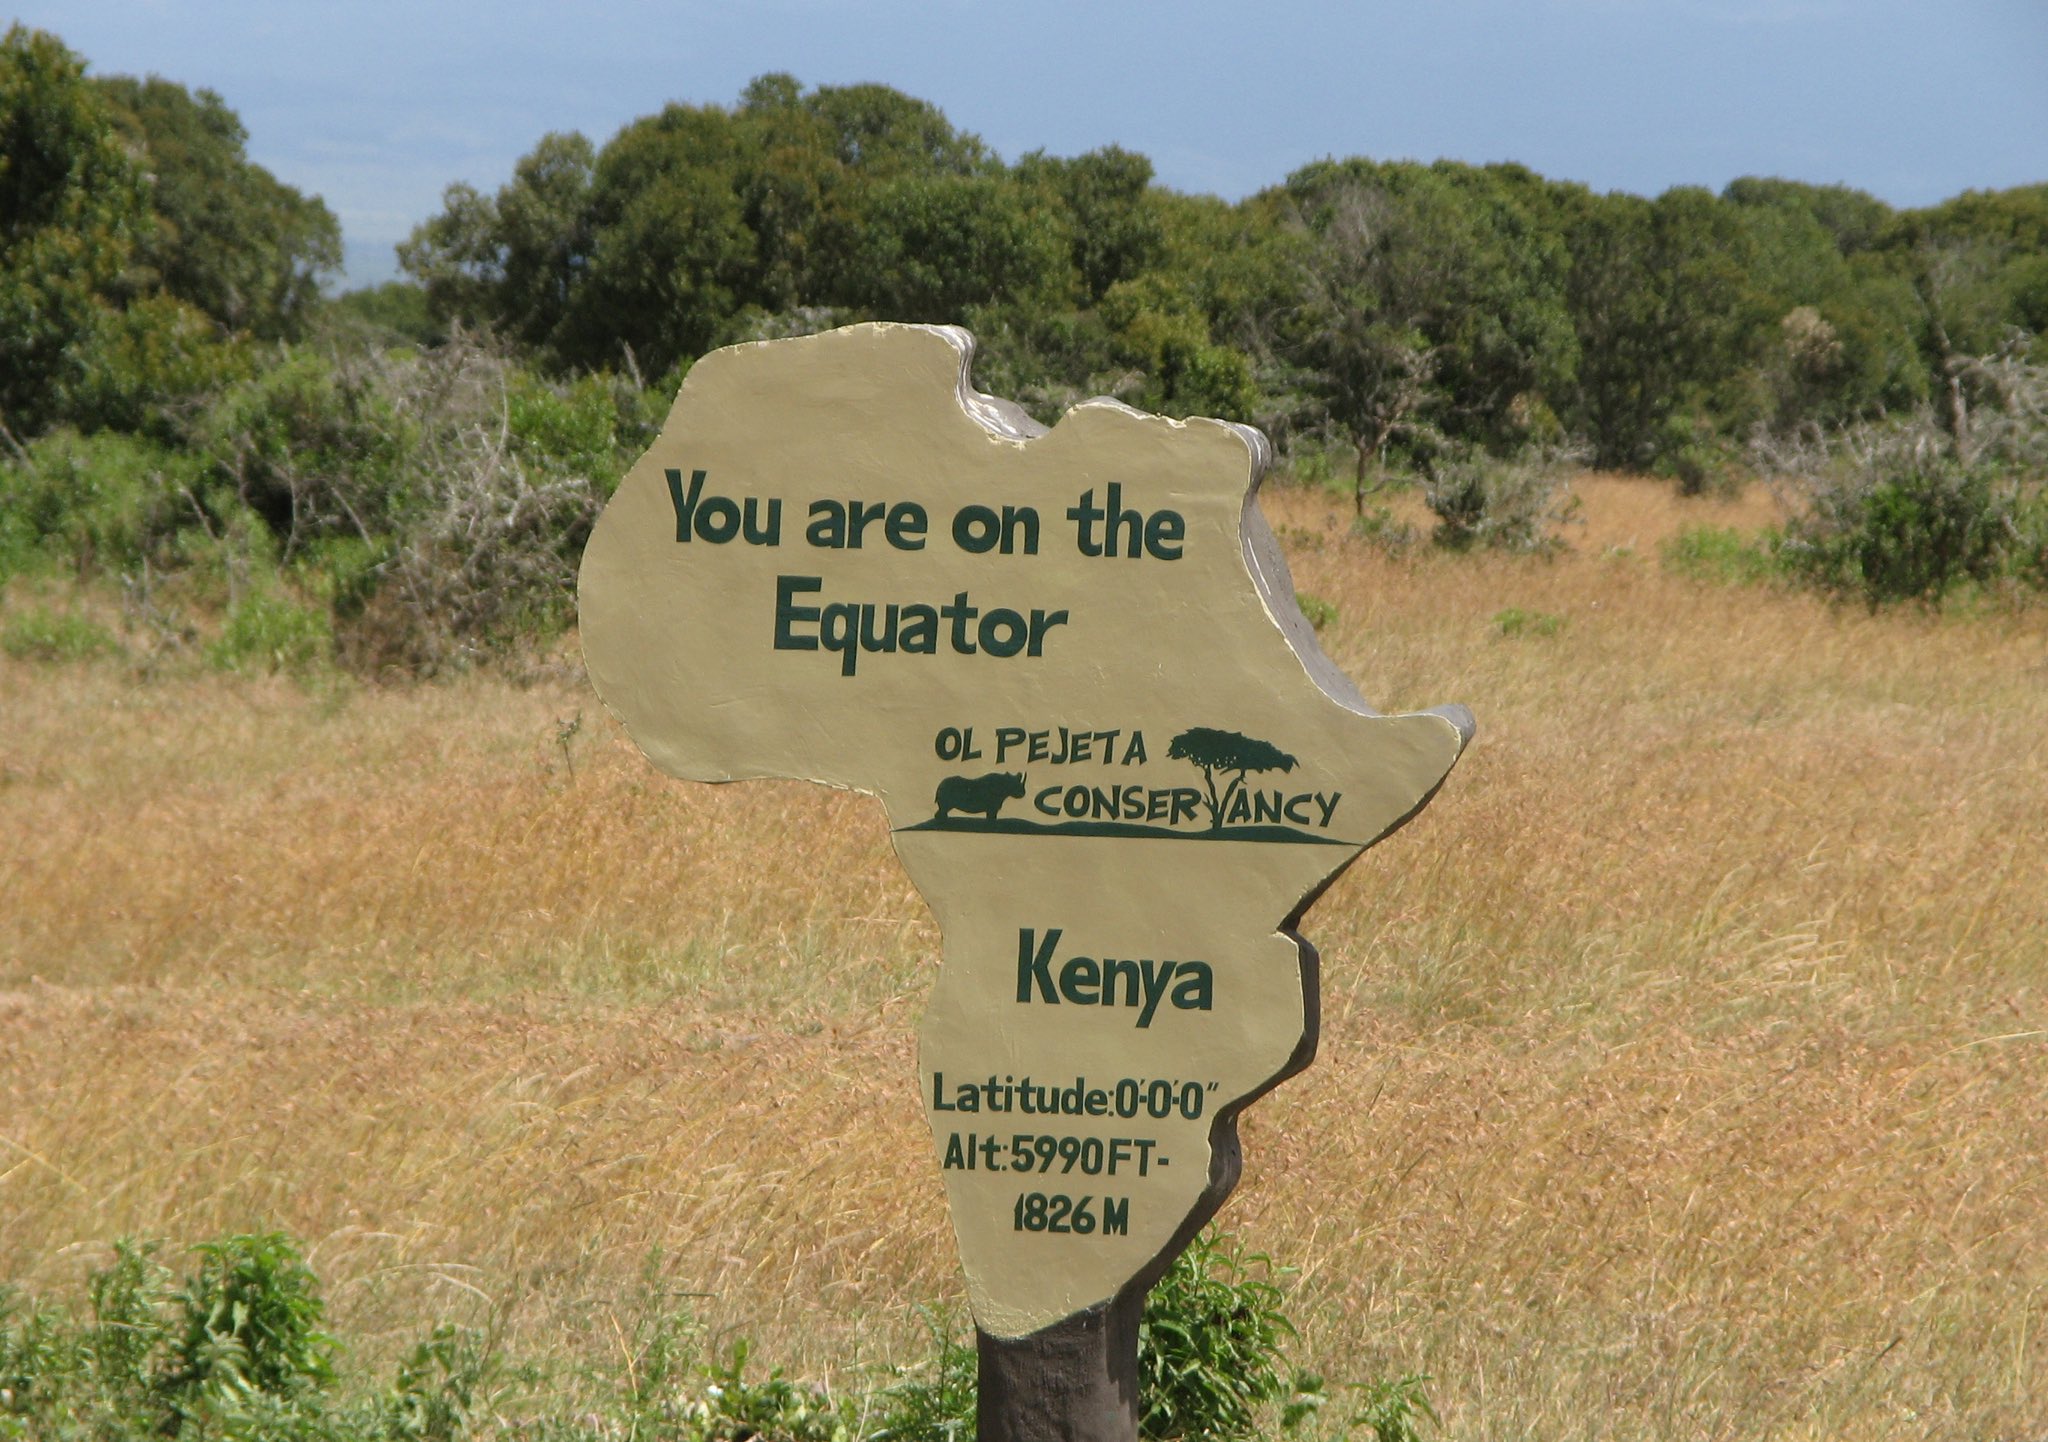 CS Mutua Vows to Revamp All Equator Signs to Boost Tourism